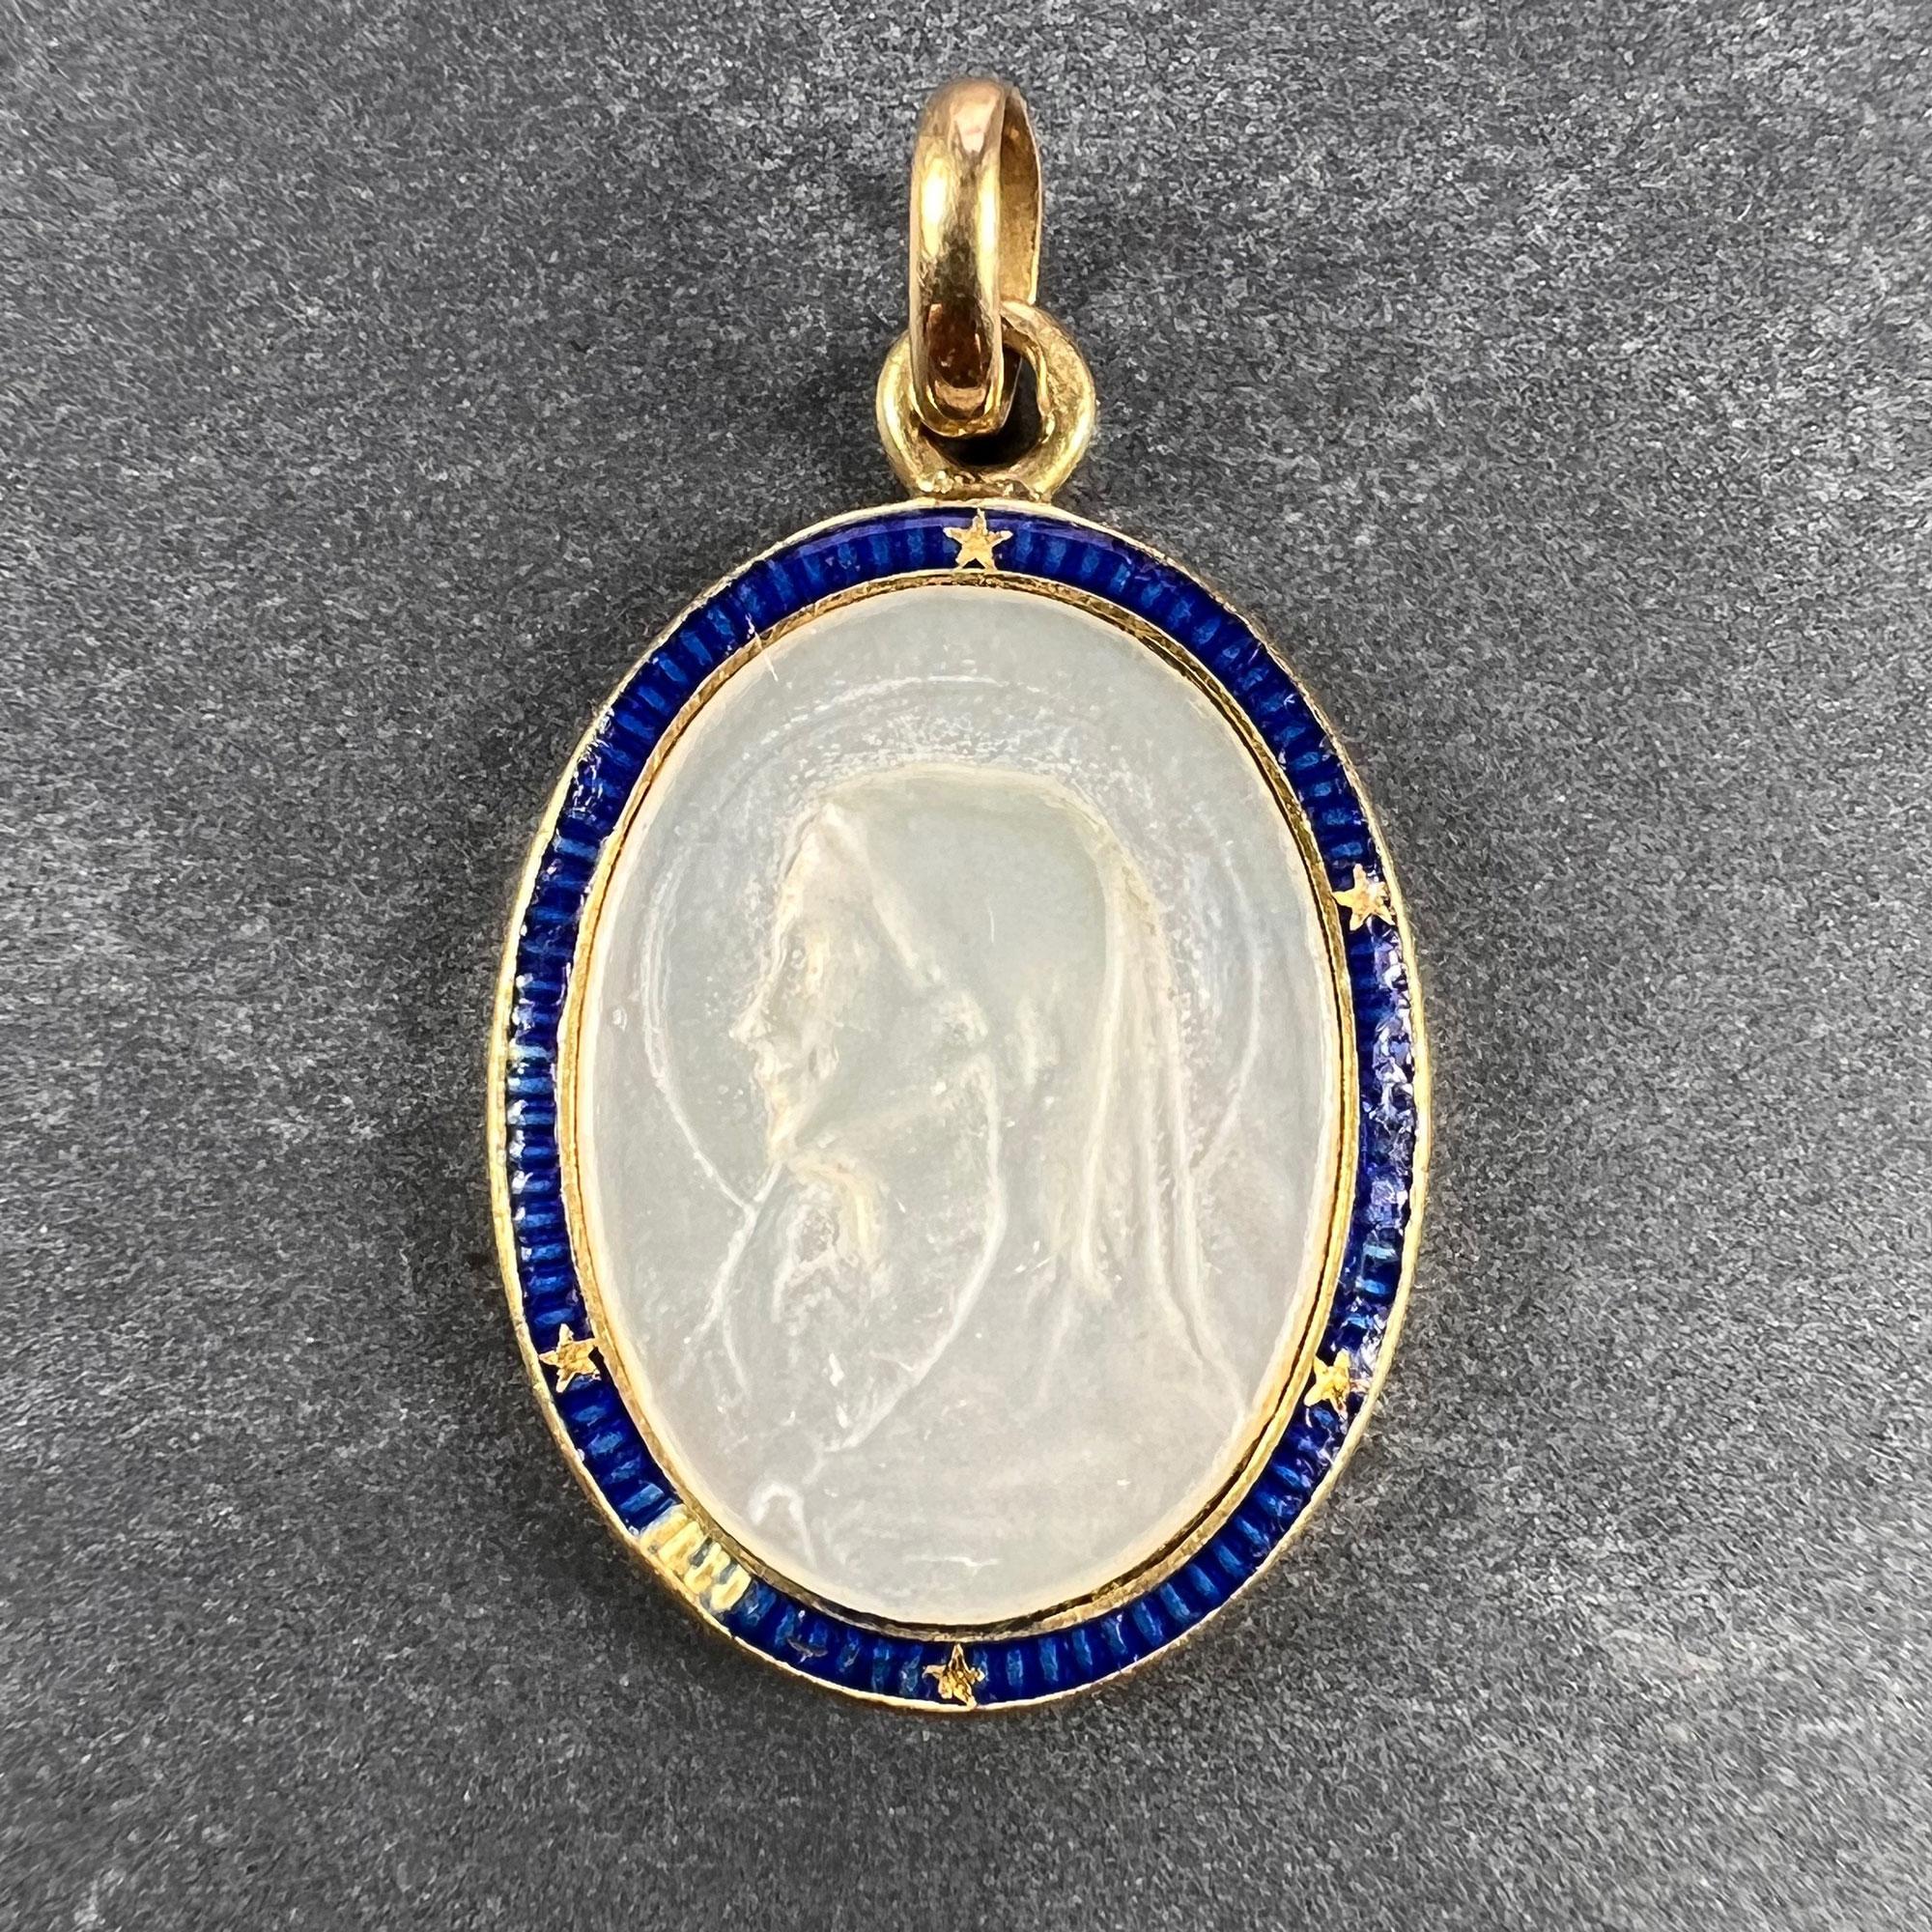 A French 18 karat (18K) yellow gold charm pendant  designed as a mother of pearl medal depicting the Virgin Mary surrounded by a blue enamel border with gold stars. Small chips to the enamel and one star lost. Stamped with the eagle mark for 18